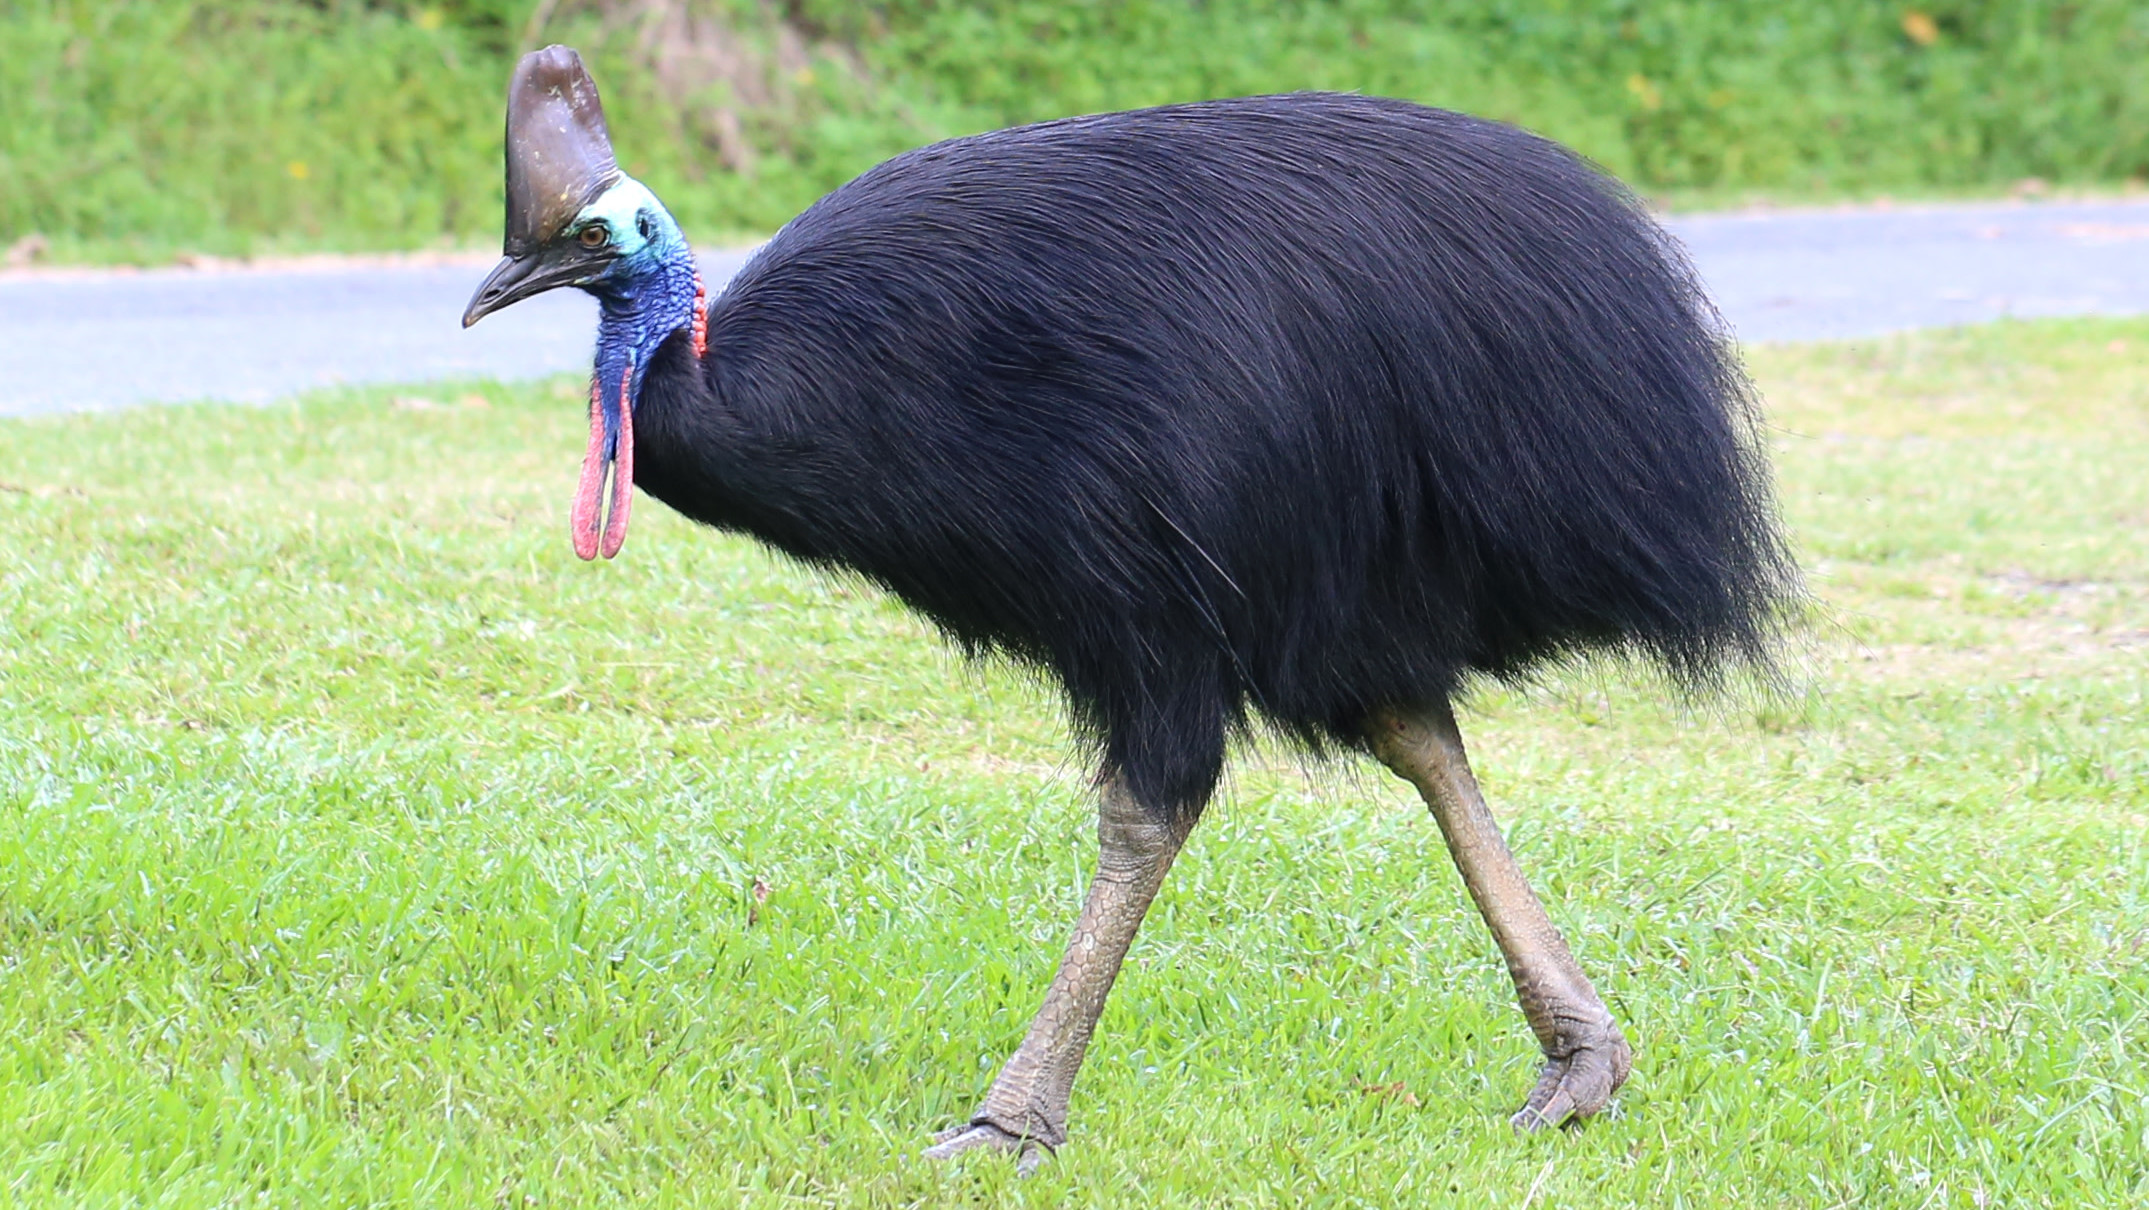 A free ranging Southern Cassowary at Etty Bay, north Queensland, Australia. (Image: Summerdrought/Wikimedia)